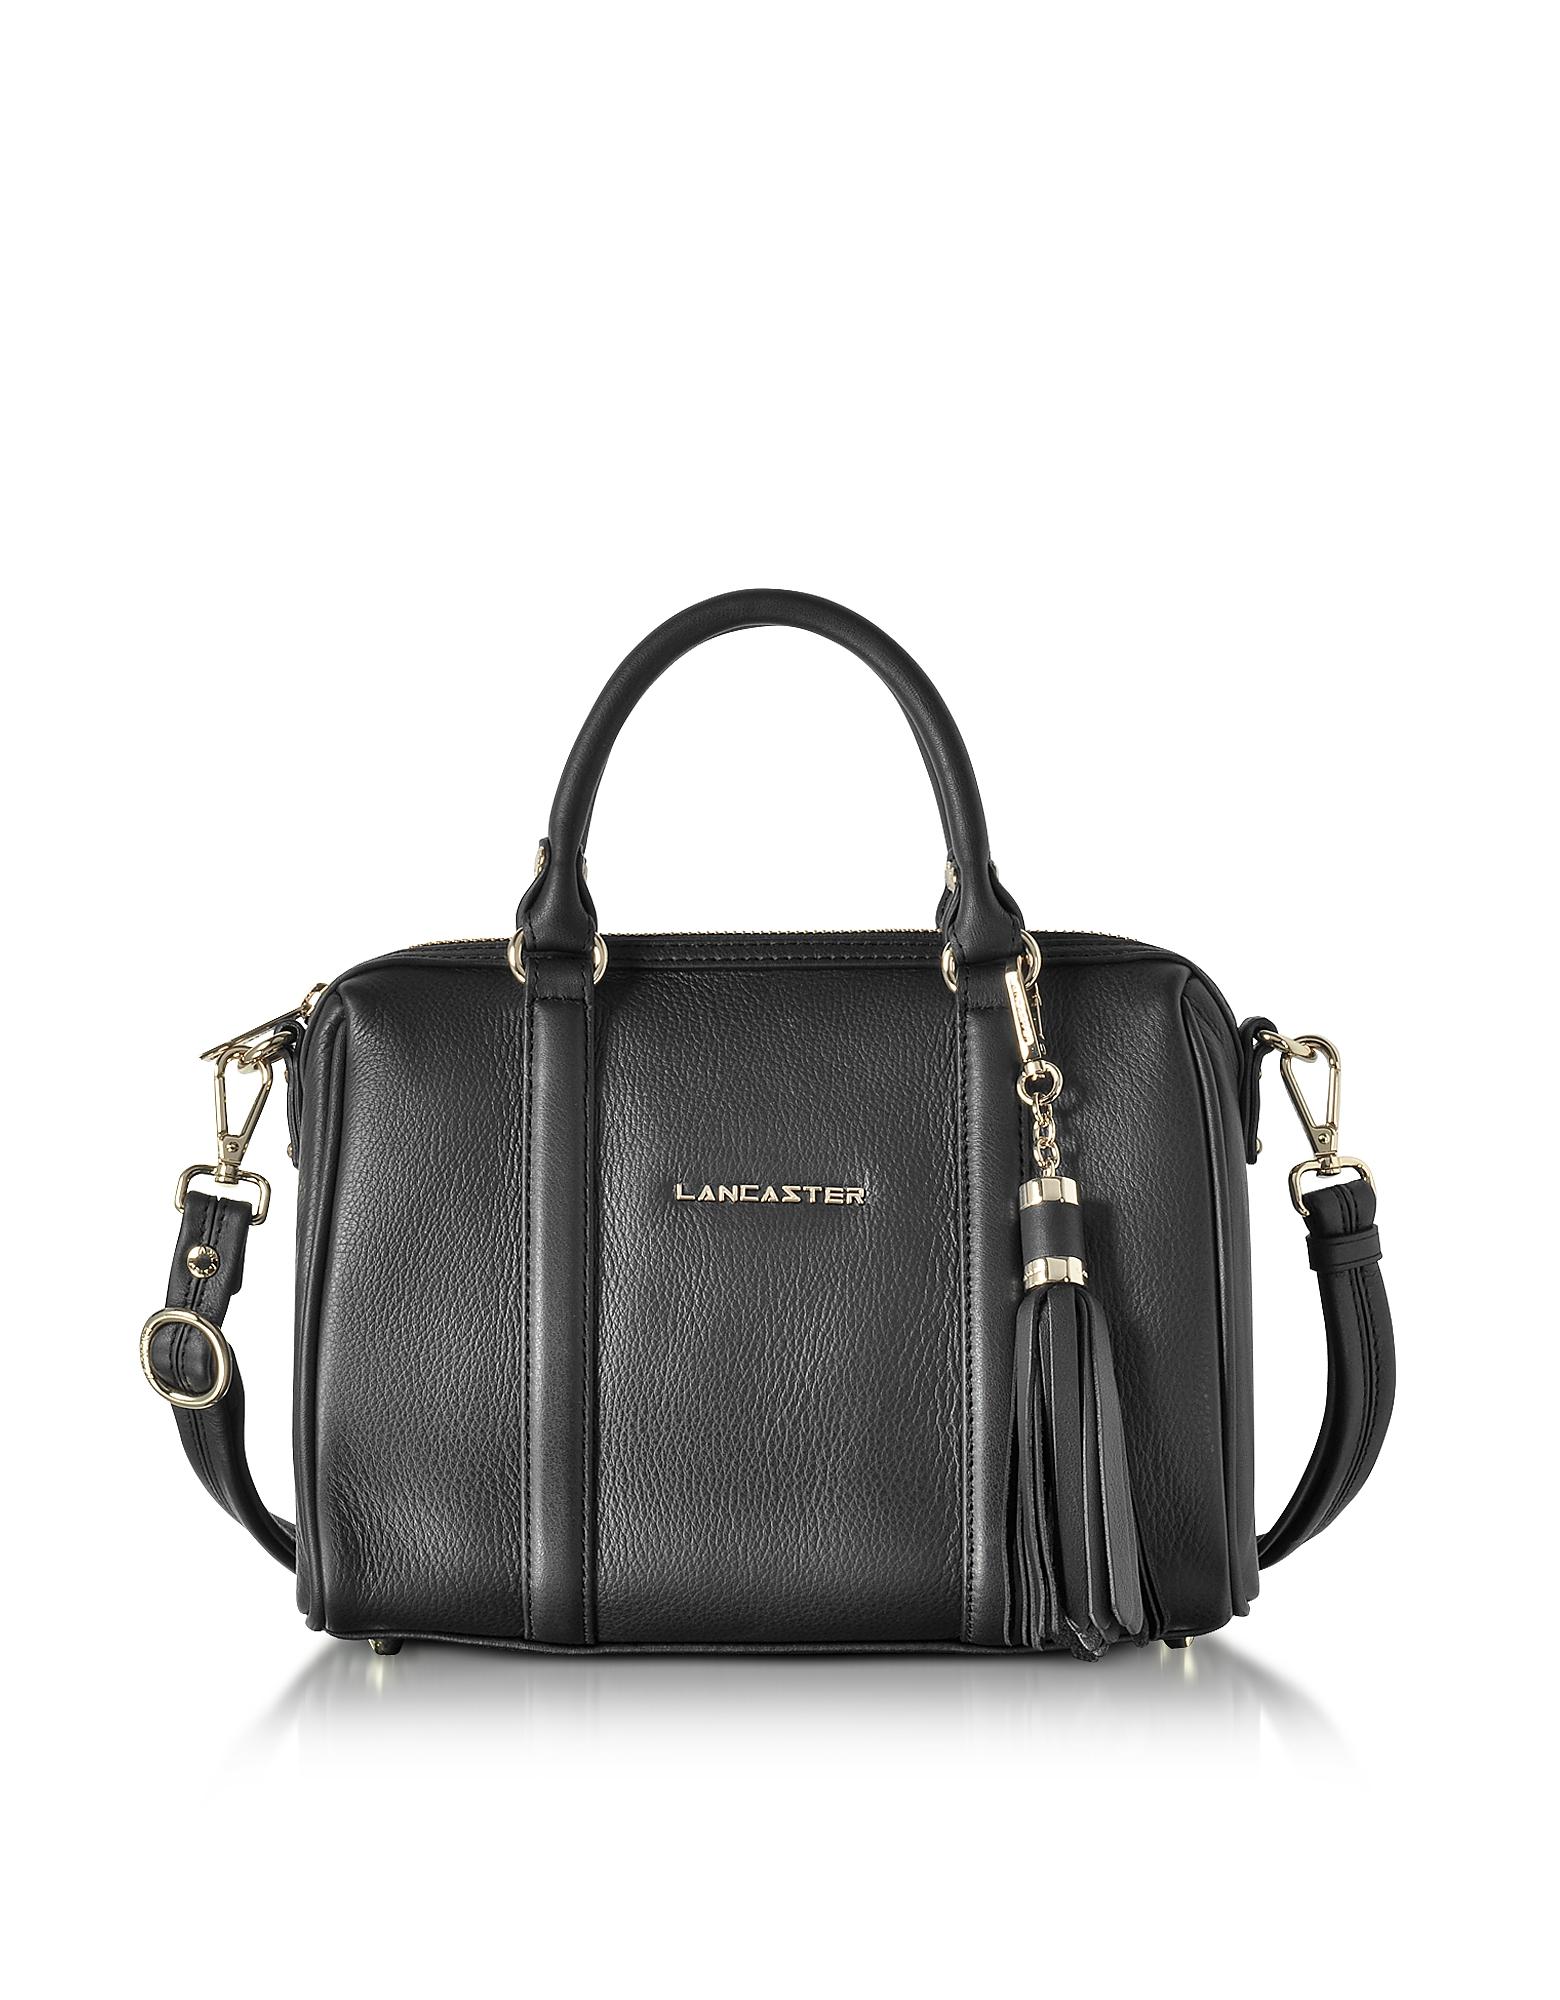 Lancaster Paris Mademoiselle Ana Grained Leather Small Duffle Bag in Black - Lyst